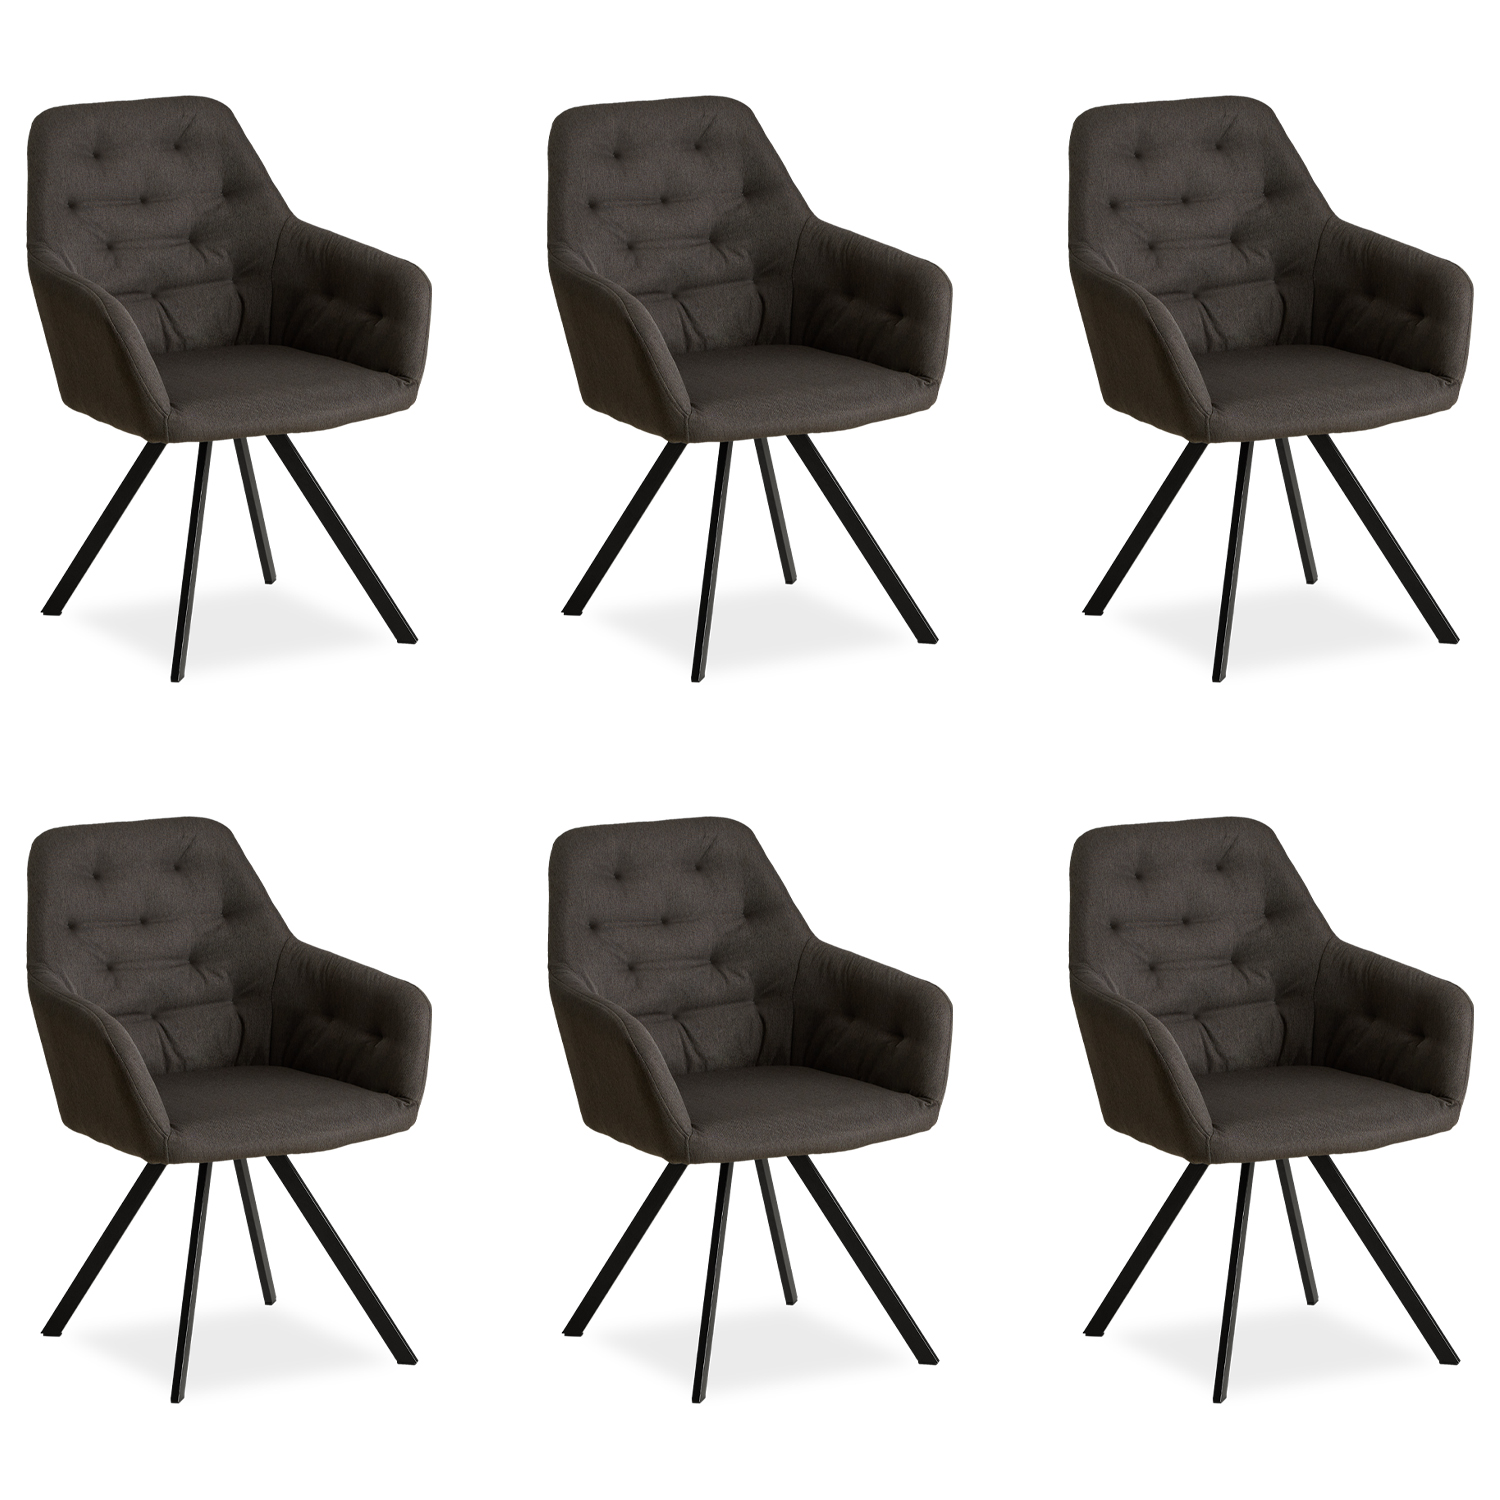 Dining Chair Set of 6 Egg Chairs Anthracite Armchairs Dining Room Chairs Upholstered Chairs Eames Chairs